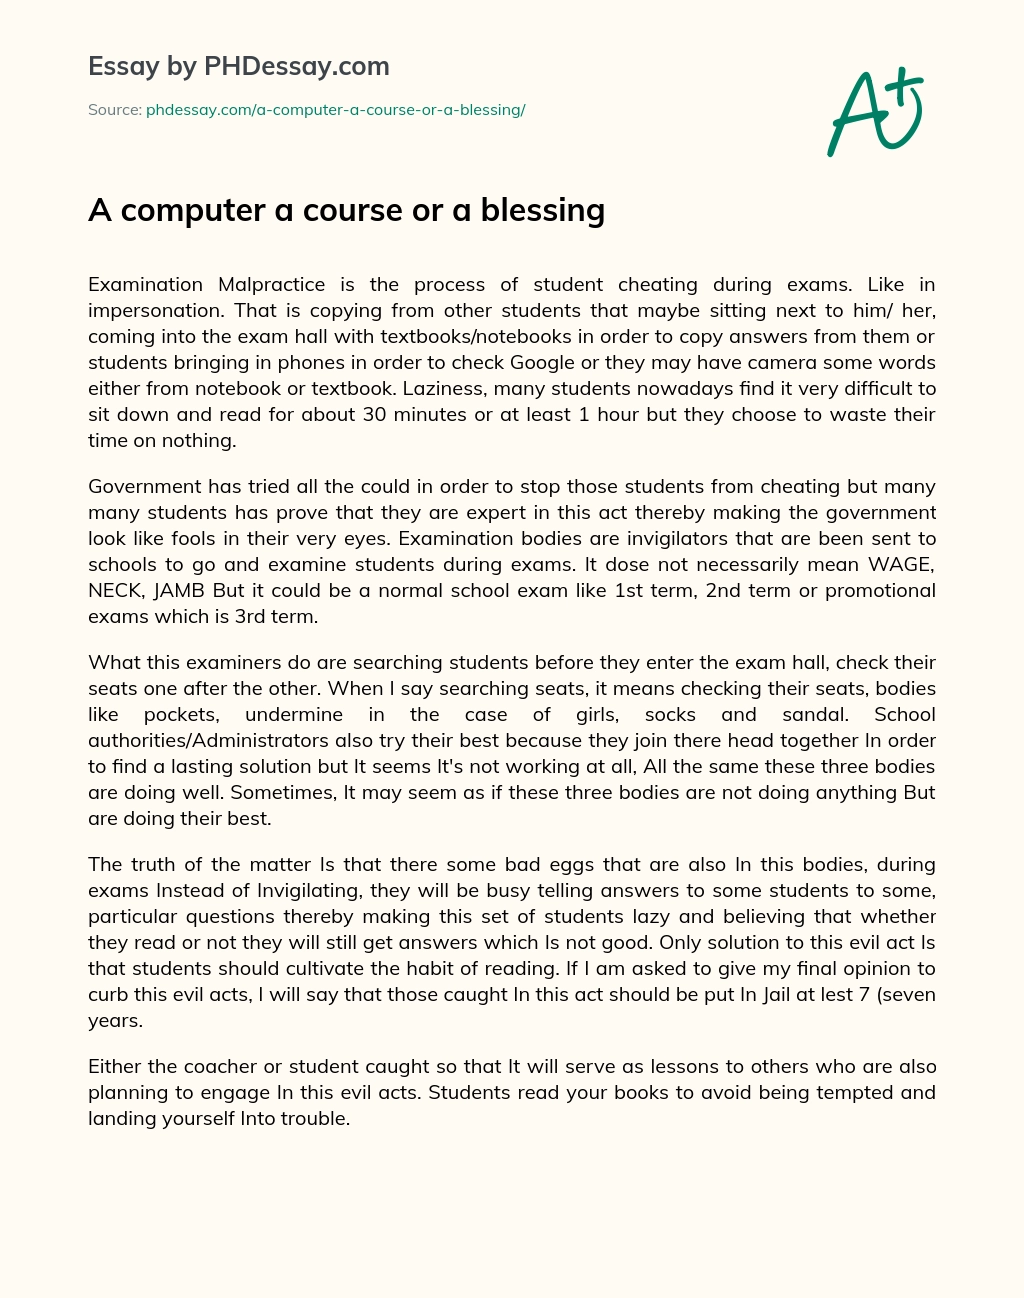 A computer a course or a blessing essay